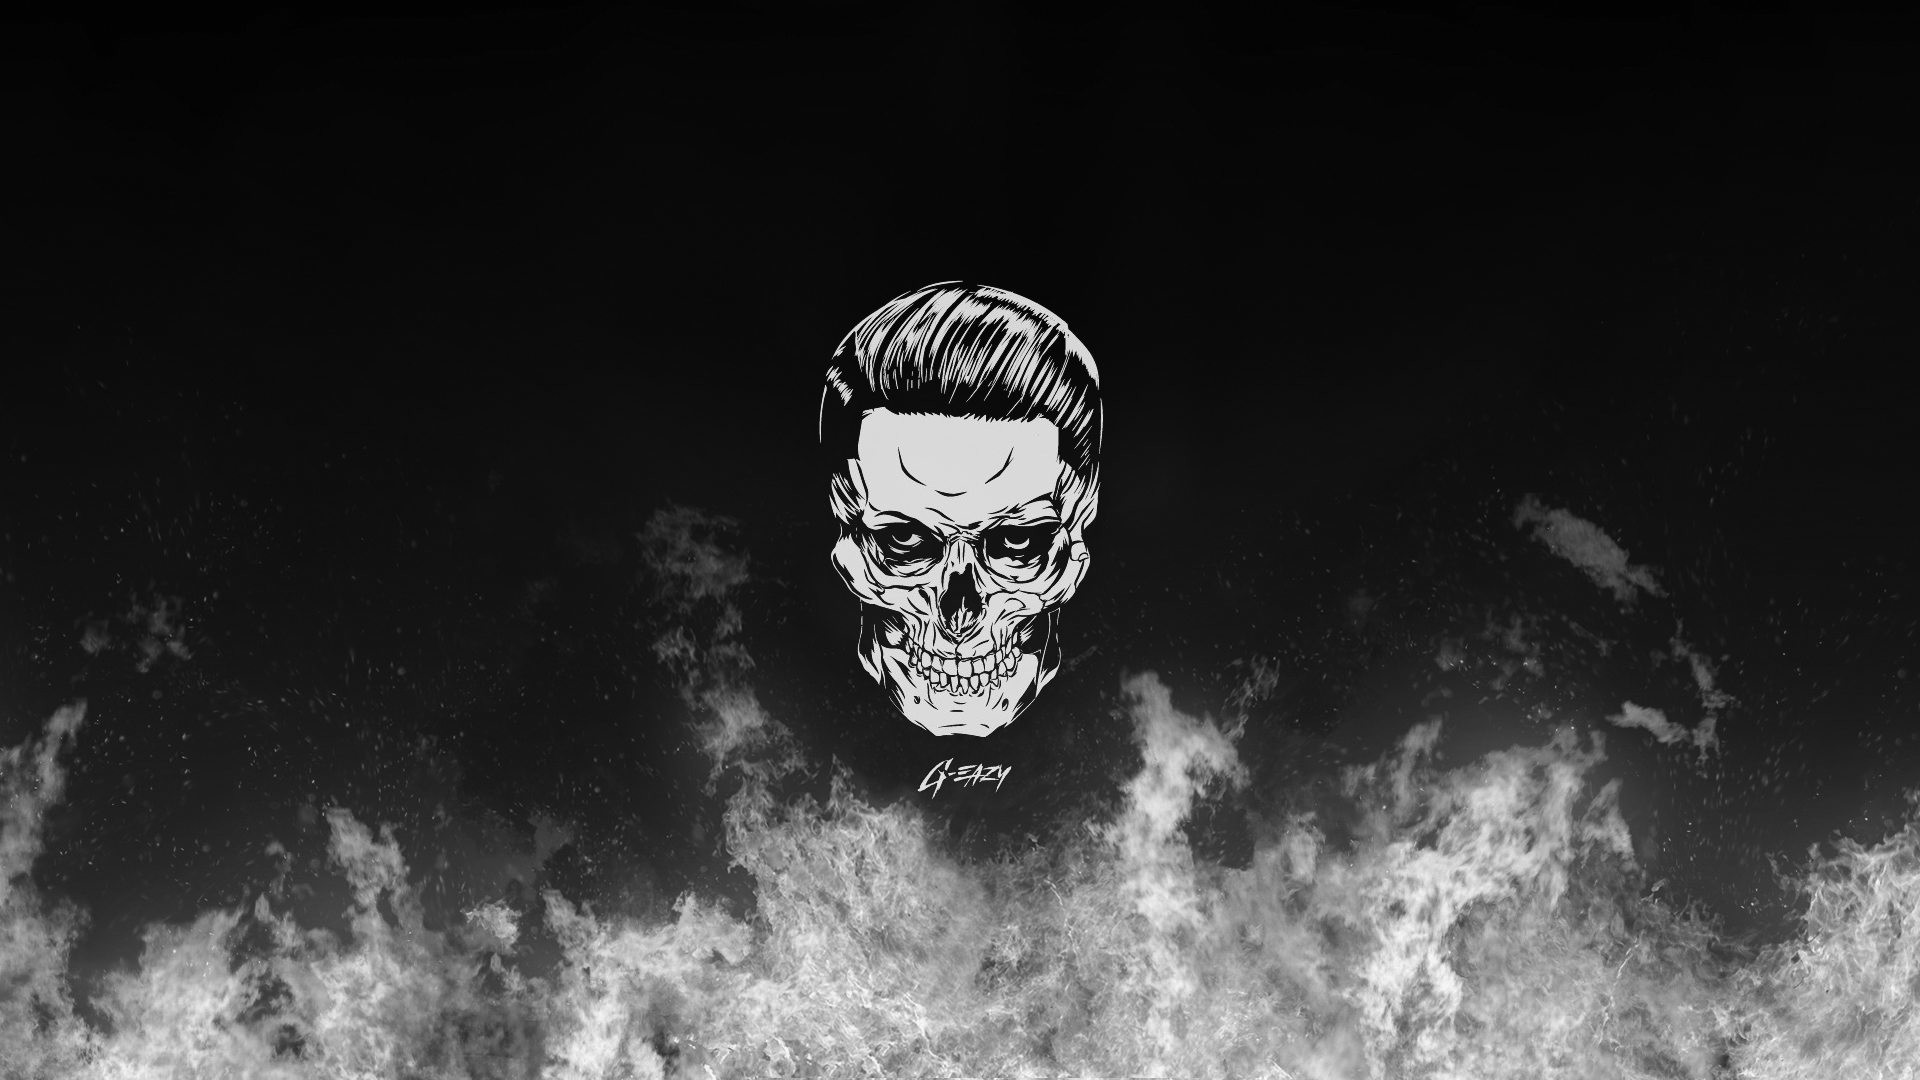 1920x1080 eazy Skull, HQ Backgrounds | HD wallpapers Gallery | Gallsource.com